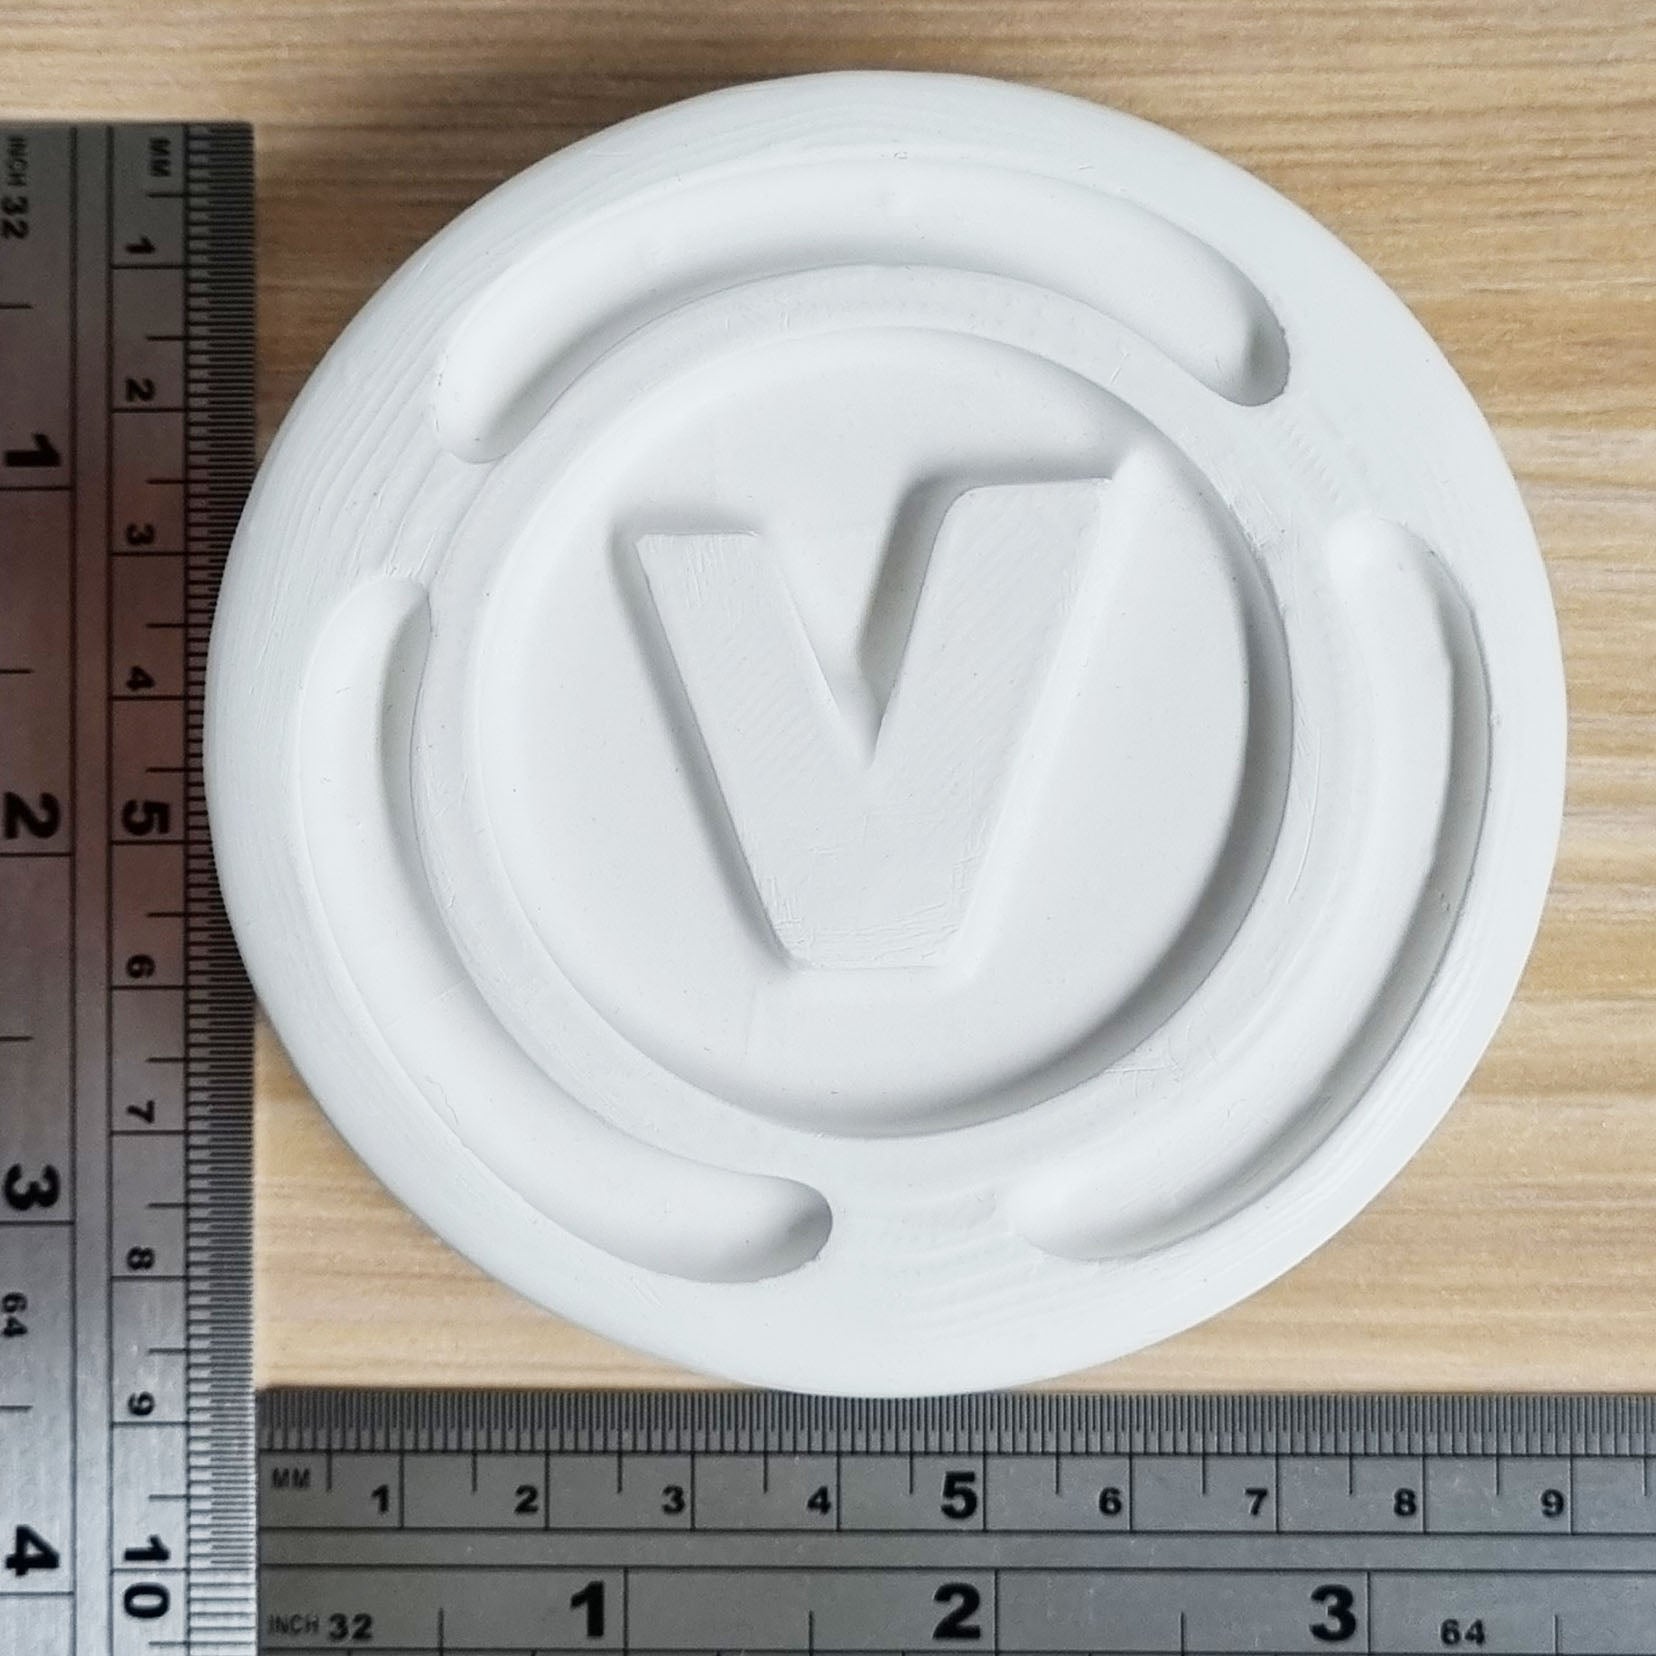 V Coin Mould | Truly Personal | Bath Bomb, Soap, Resin, Chocolate, Jelly, Wax Melts Mold